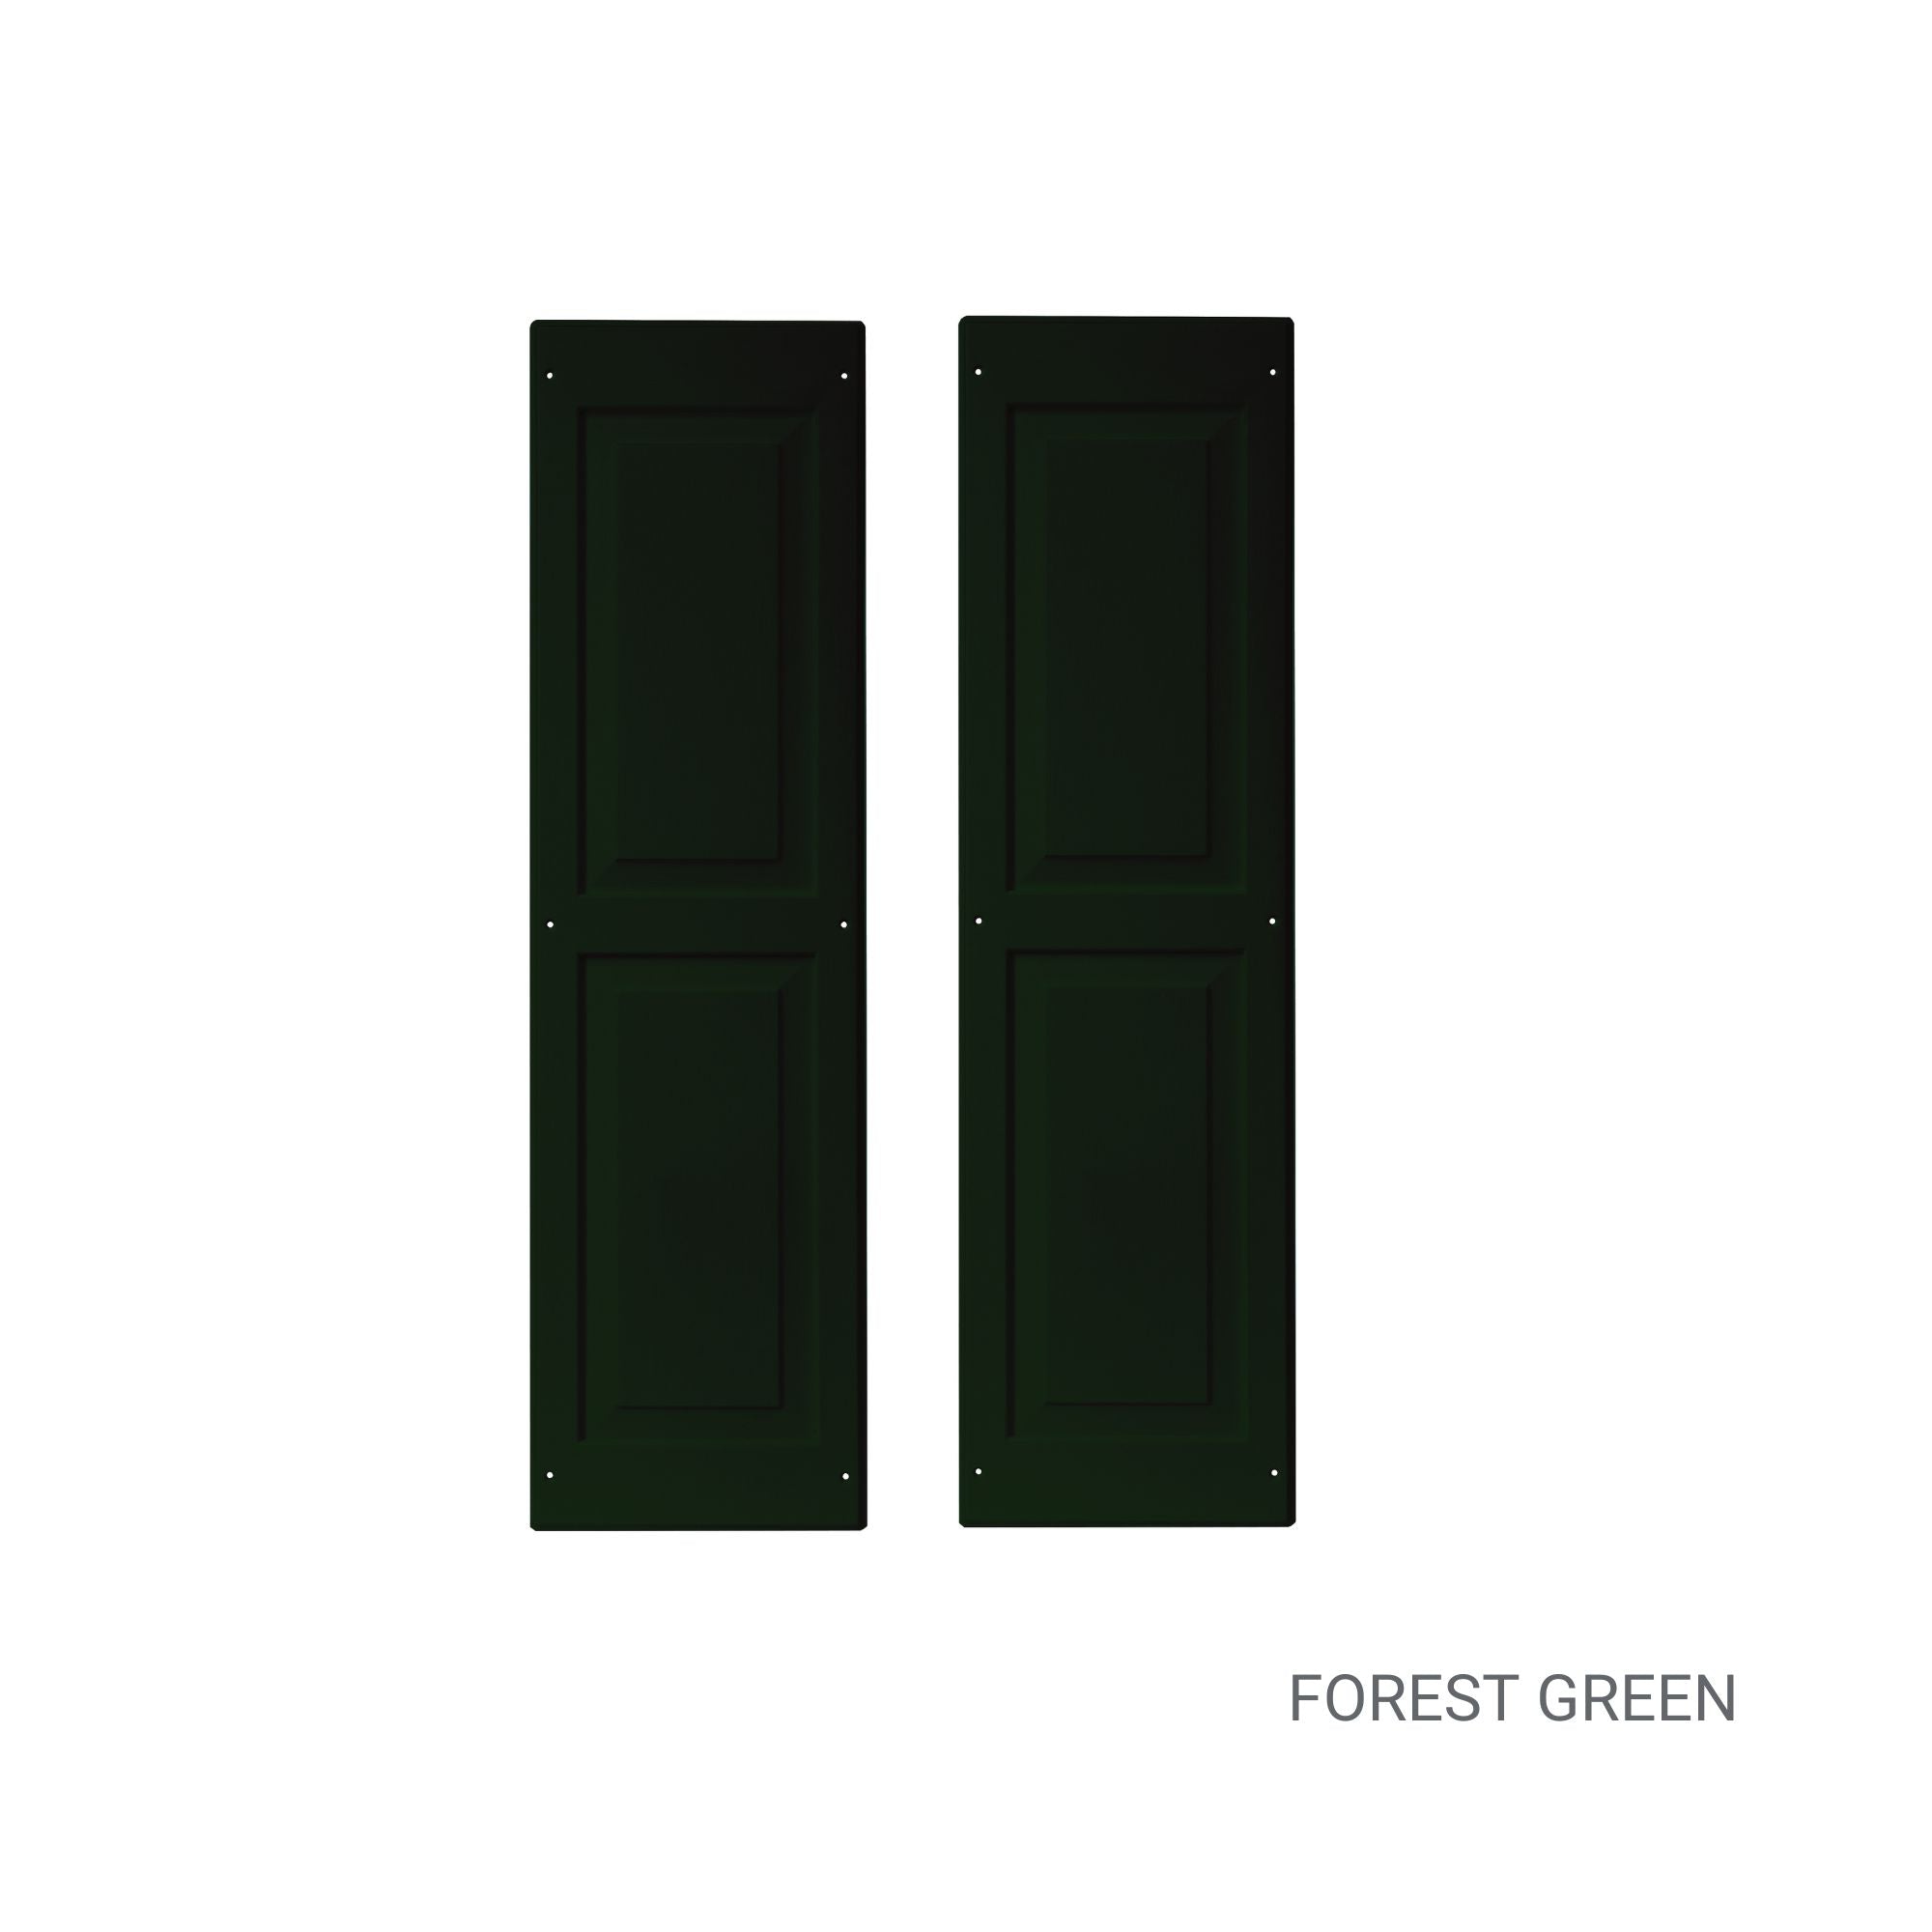 Pair of 12" W x 43" H Raised Panel Forest Green Shutters for Sheds, Playhouses, and MORE